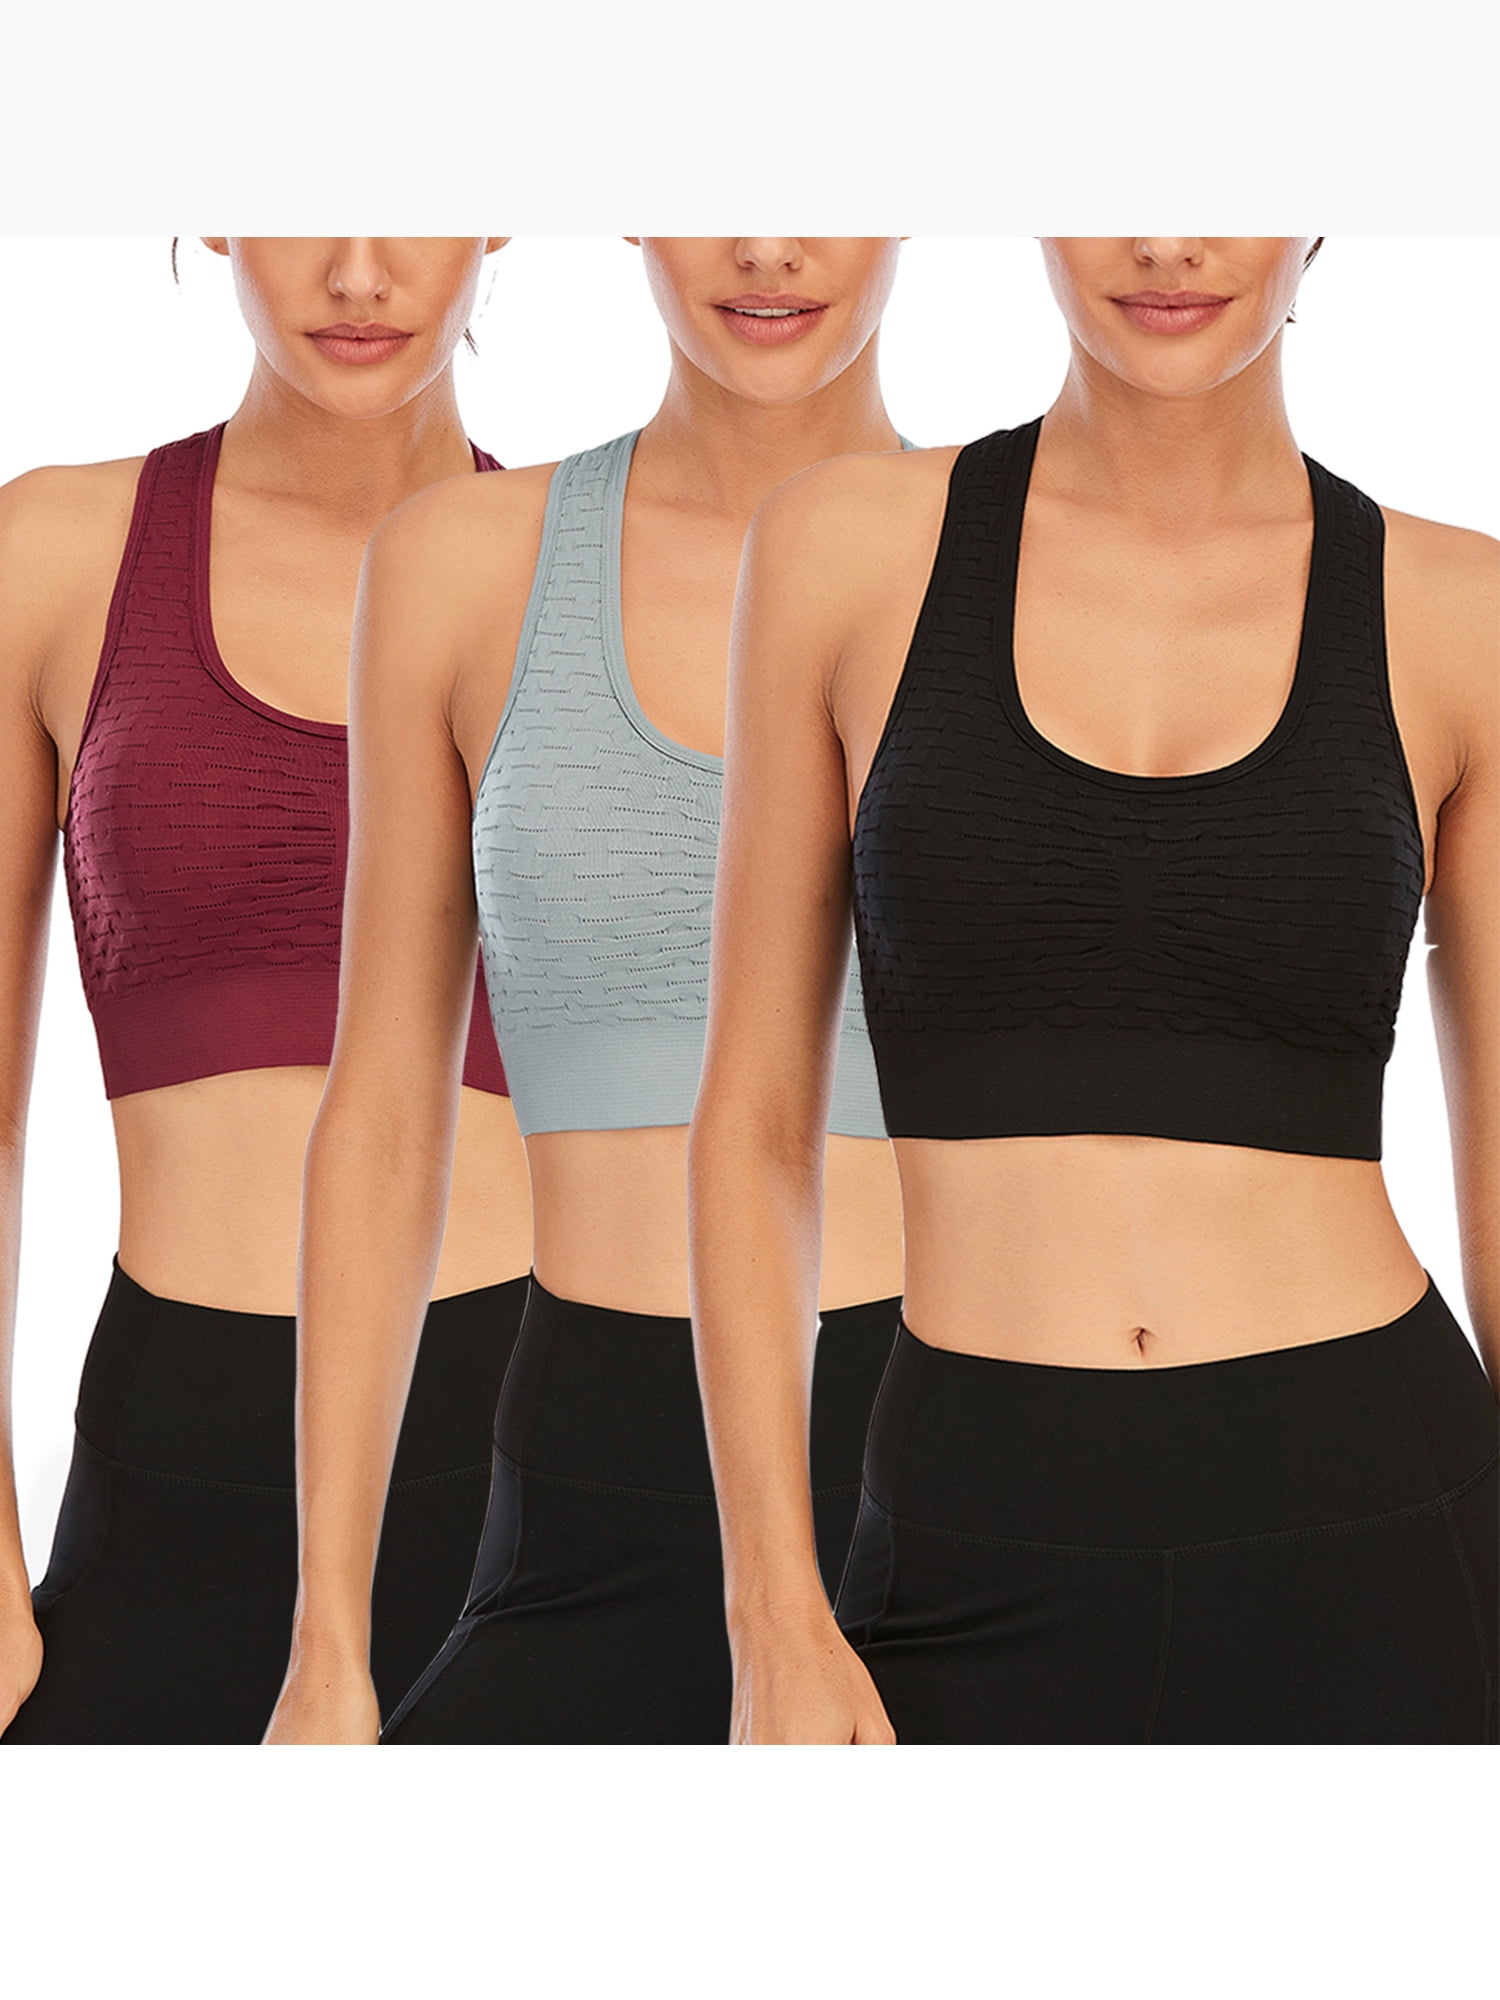 FUTATA 1/3 Pack Women's Seamless Padded Sports Bras High Impact Support  Push Up Bras Seamless Racerback Yoga Bras Crop Tank Top Fit For Running  Active